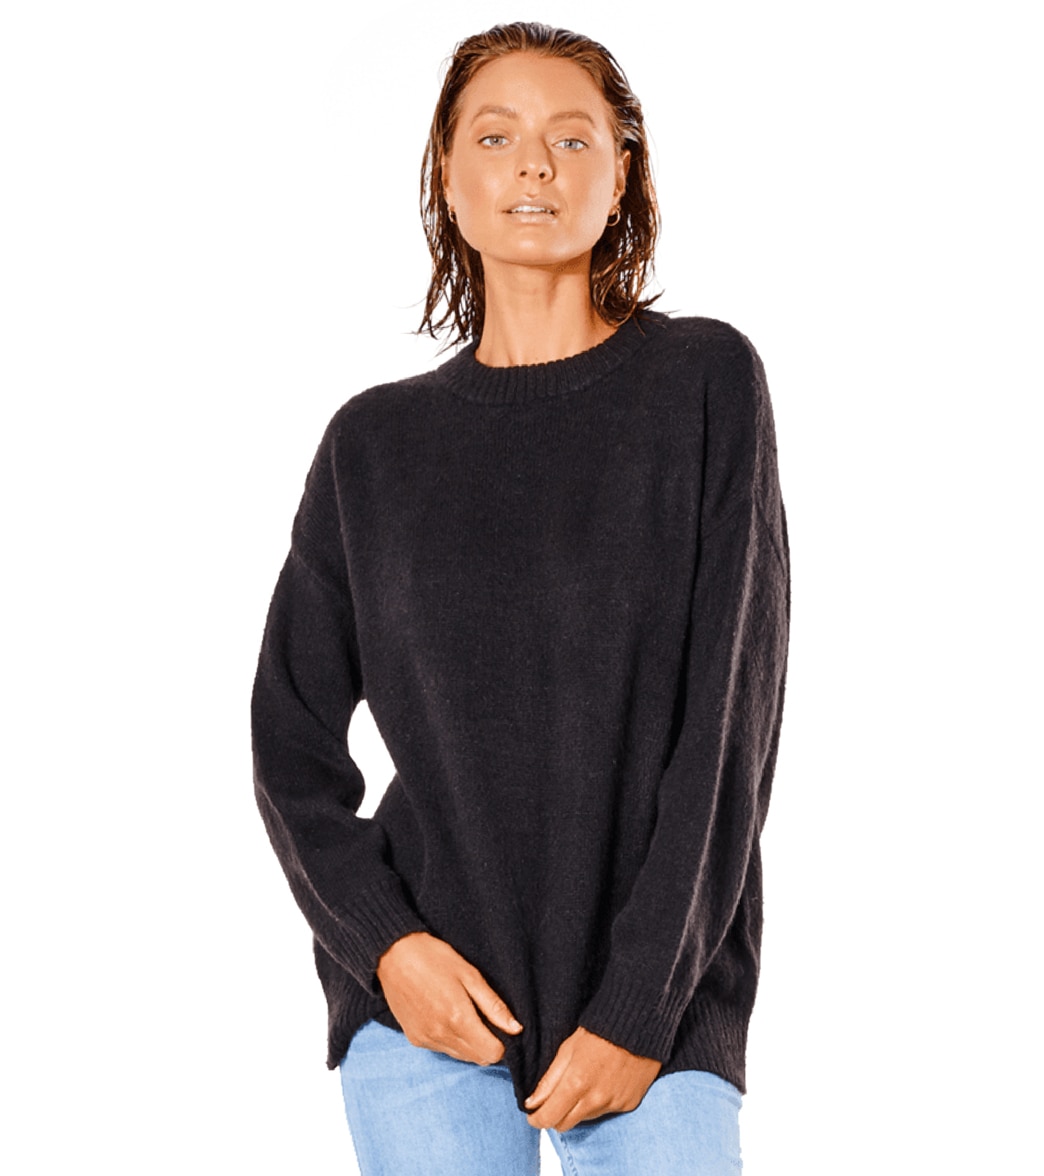 Rip Curl Women's Freshwater Crew Sweater - Black Large - Swimoutlet.com